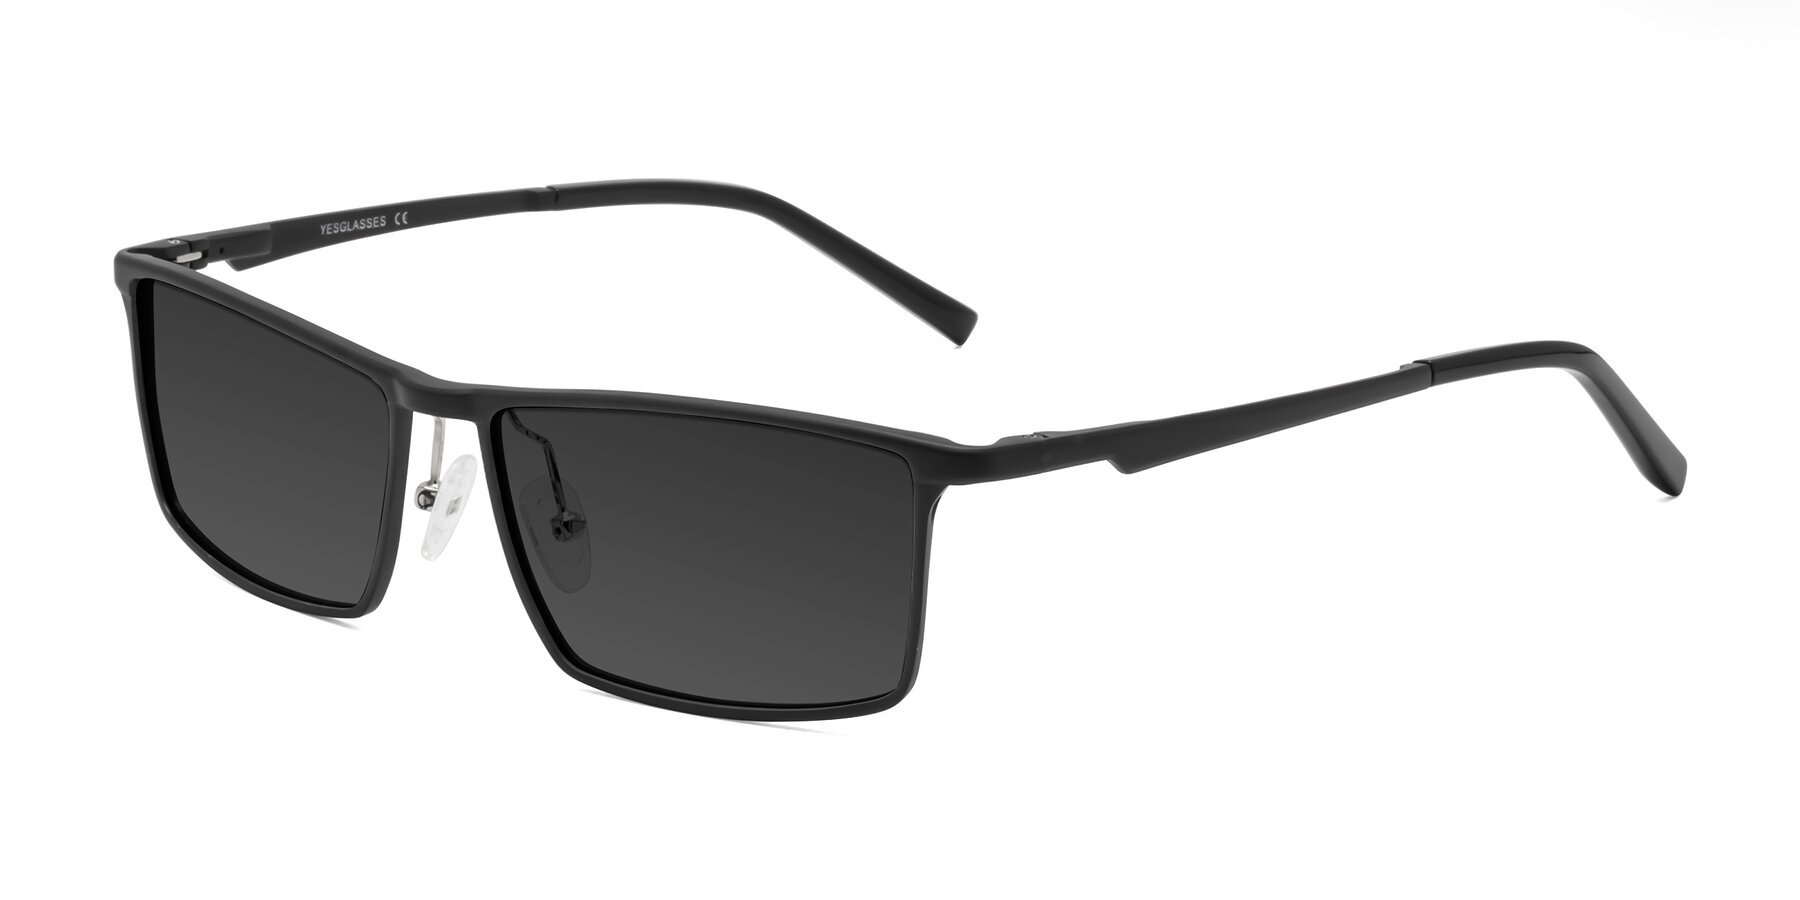 Angle of CX6330 in Black with Gray Tinted Lenses